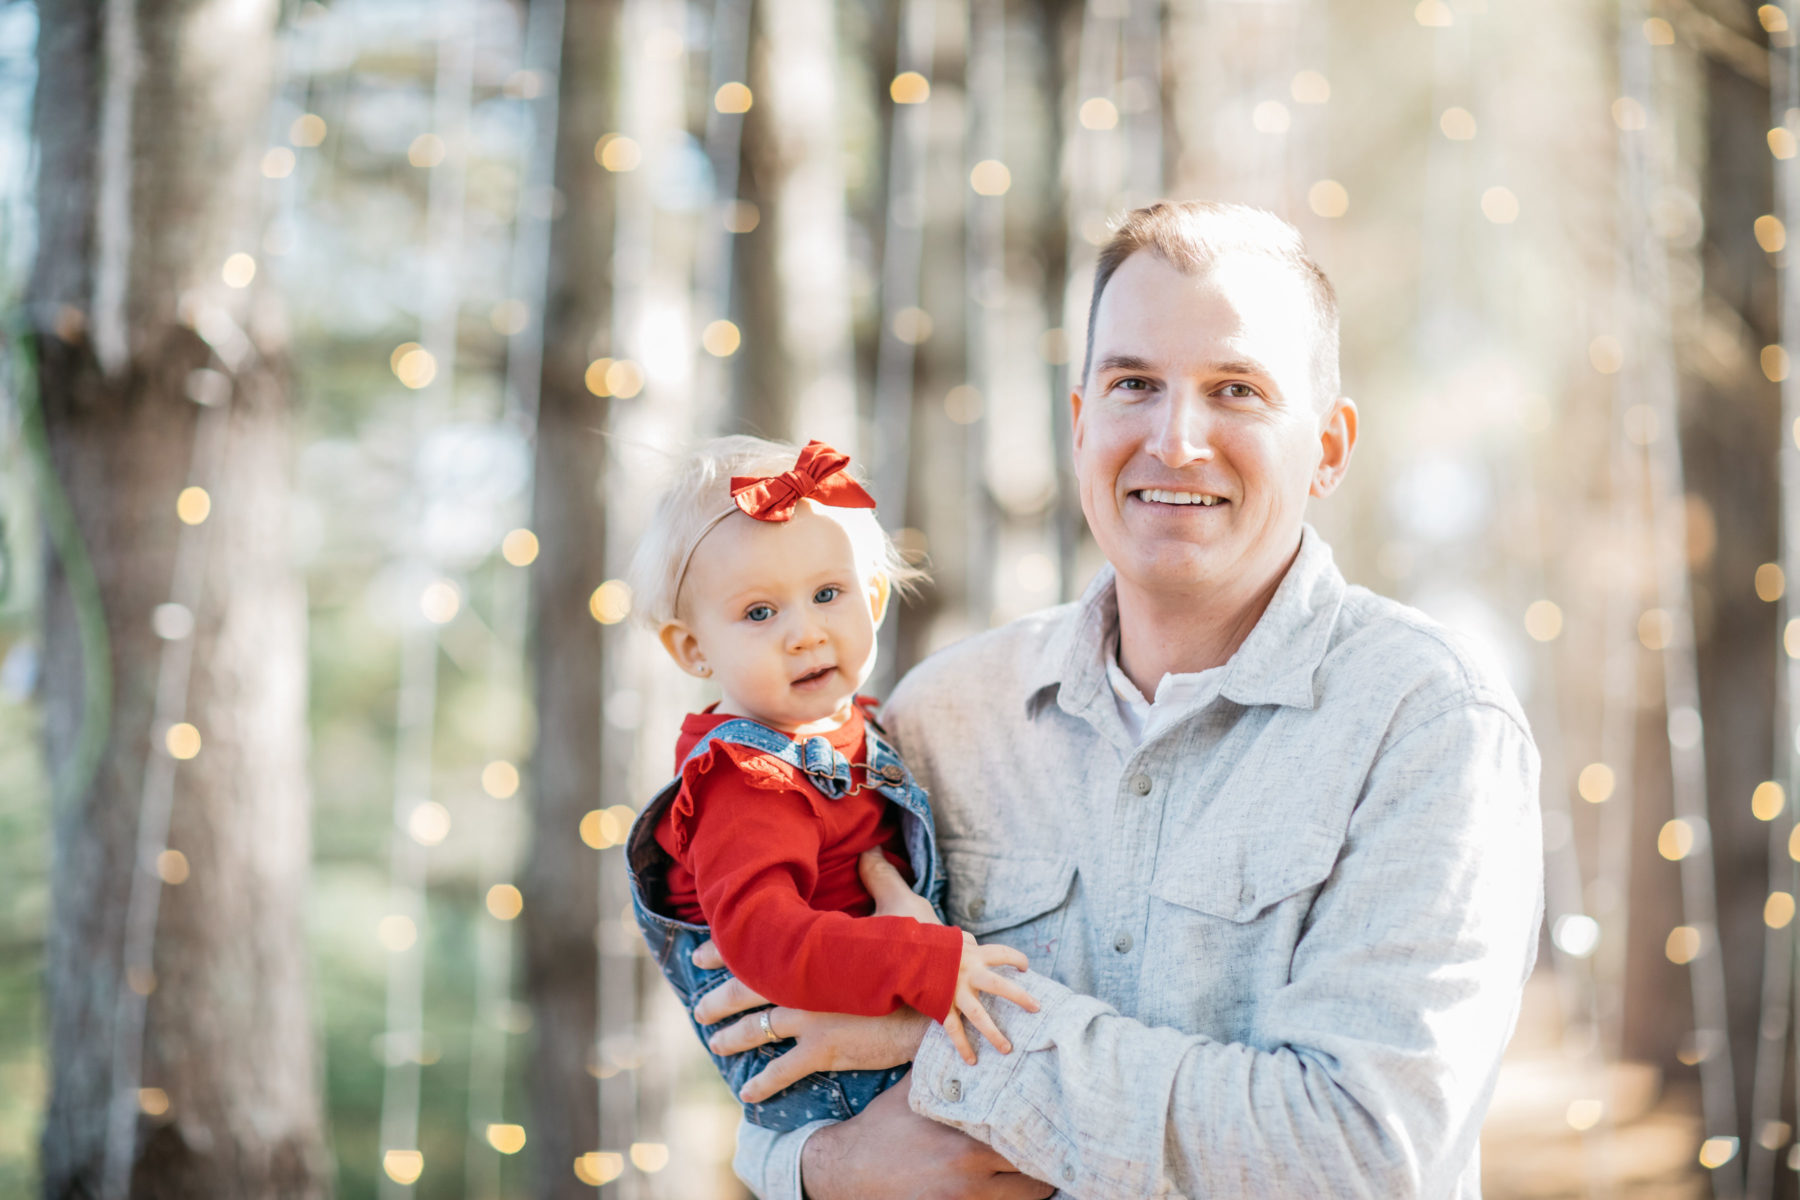 Outdoor Christmas Photo ideas featured on Nashville Baby Guide